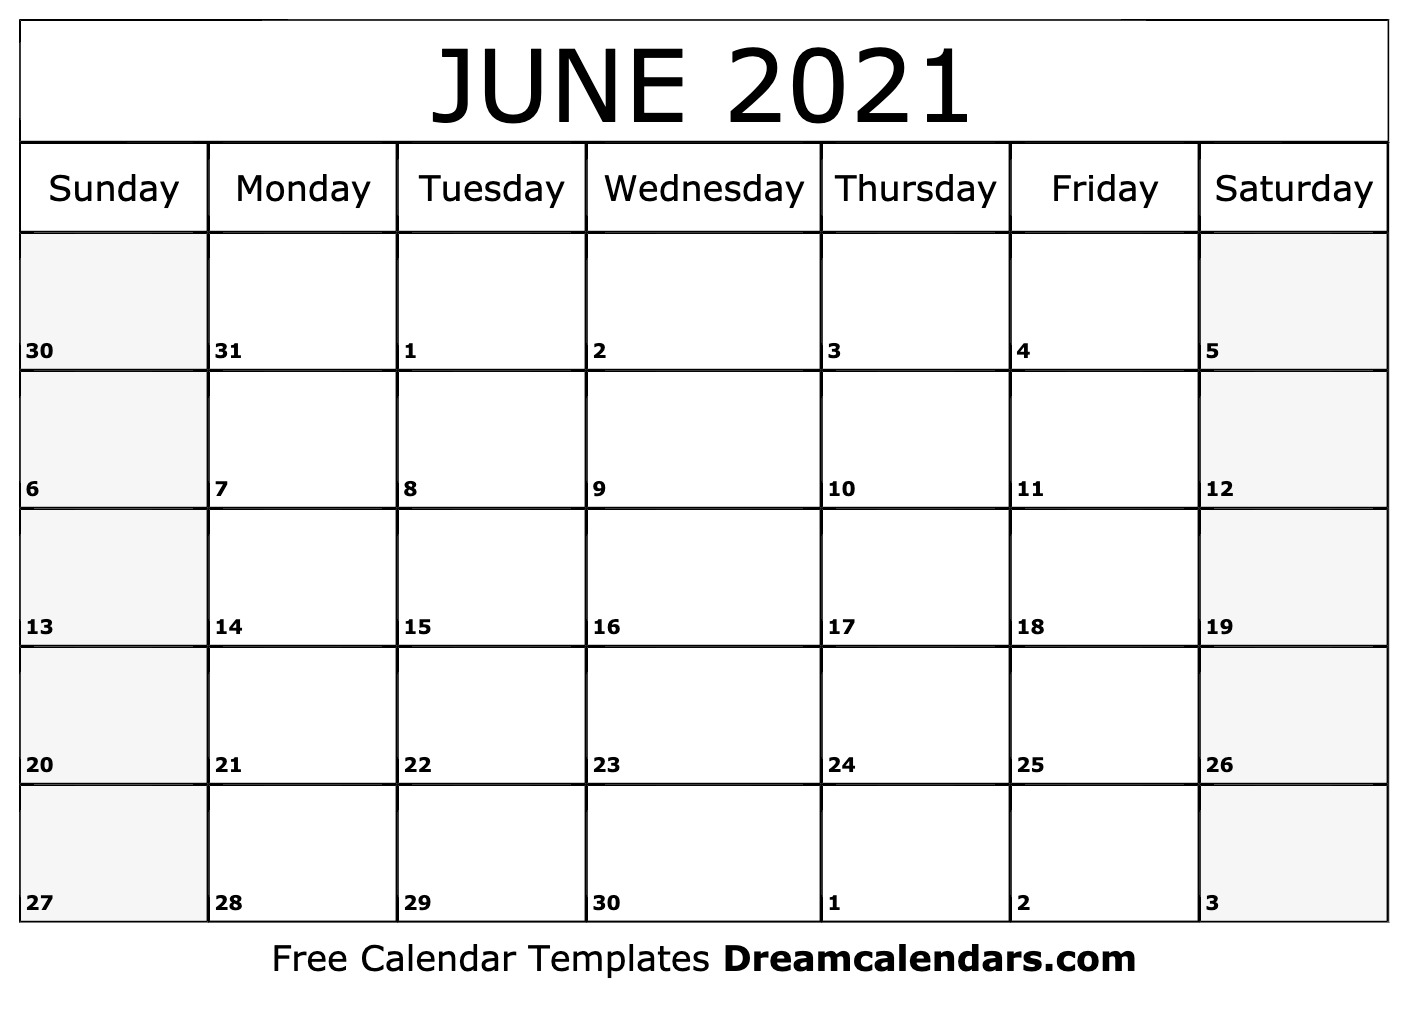 June 2021 Calendar - Free Printable with Holidays and Observances